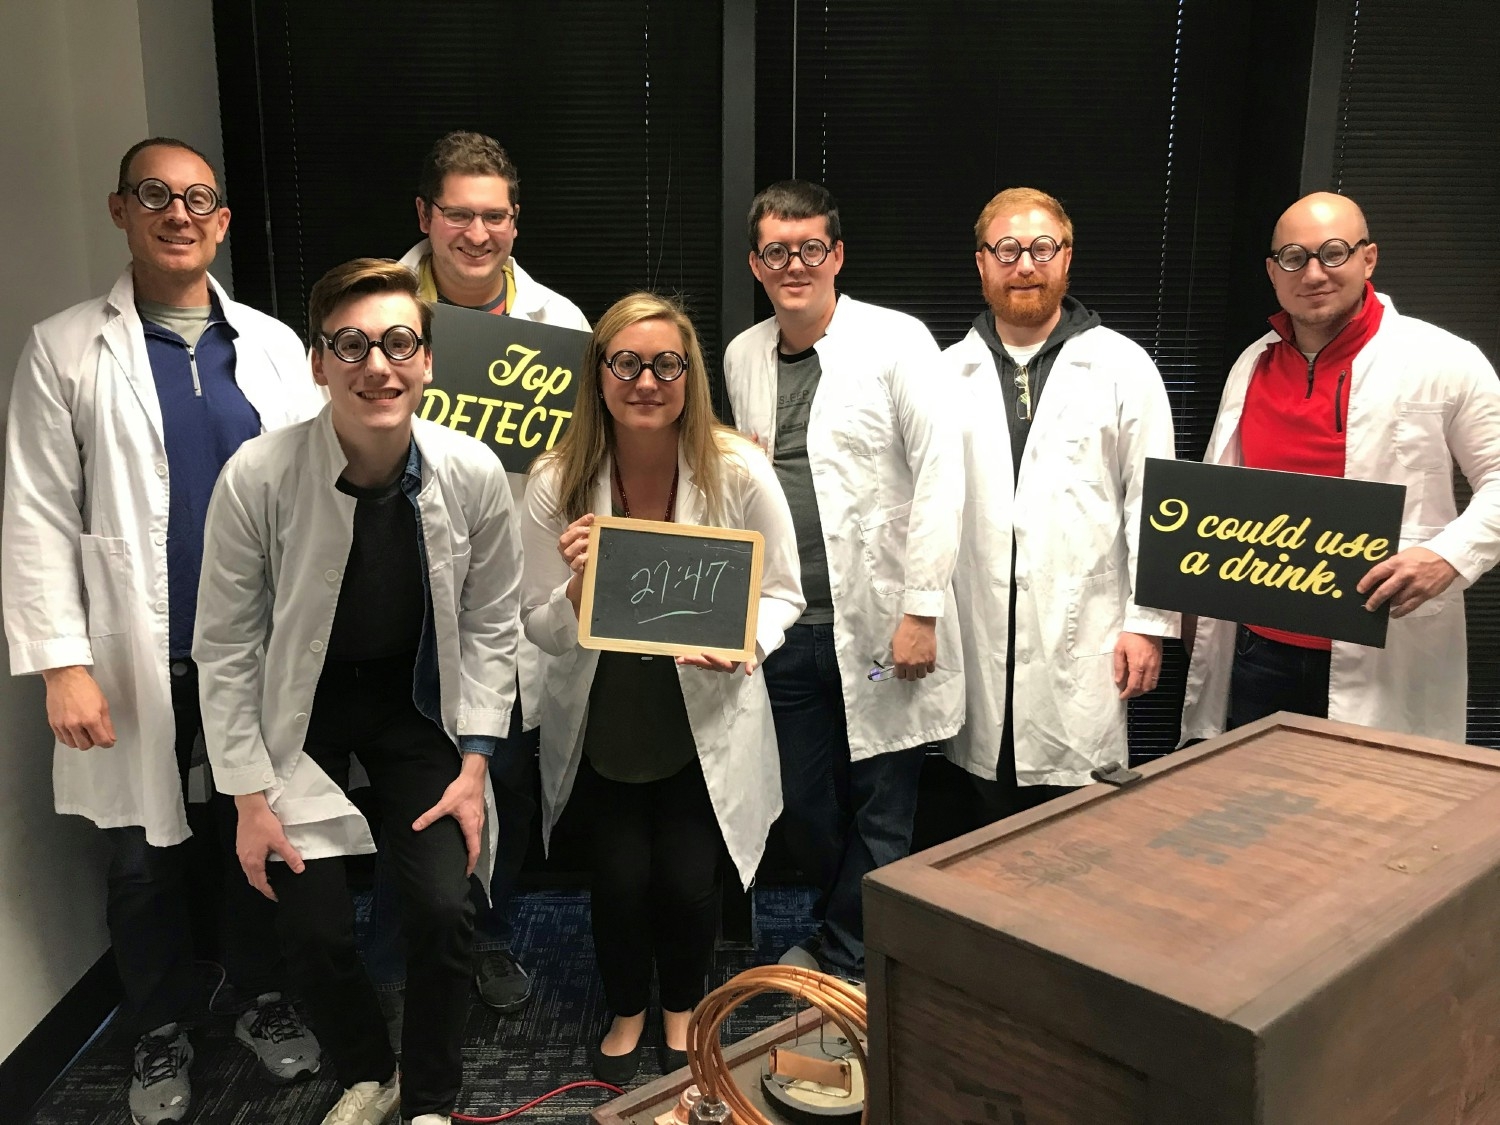 TeamDynamix employees beat the escape room in less than 30 minutes